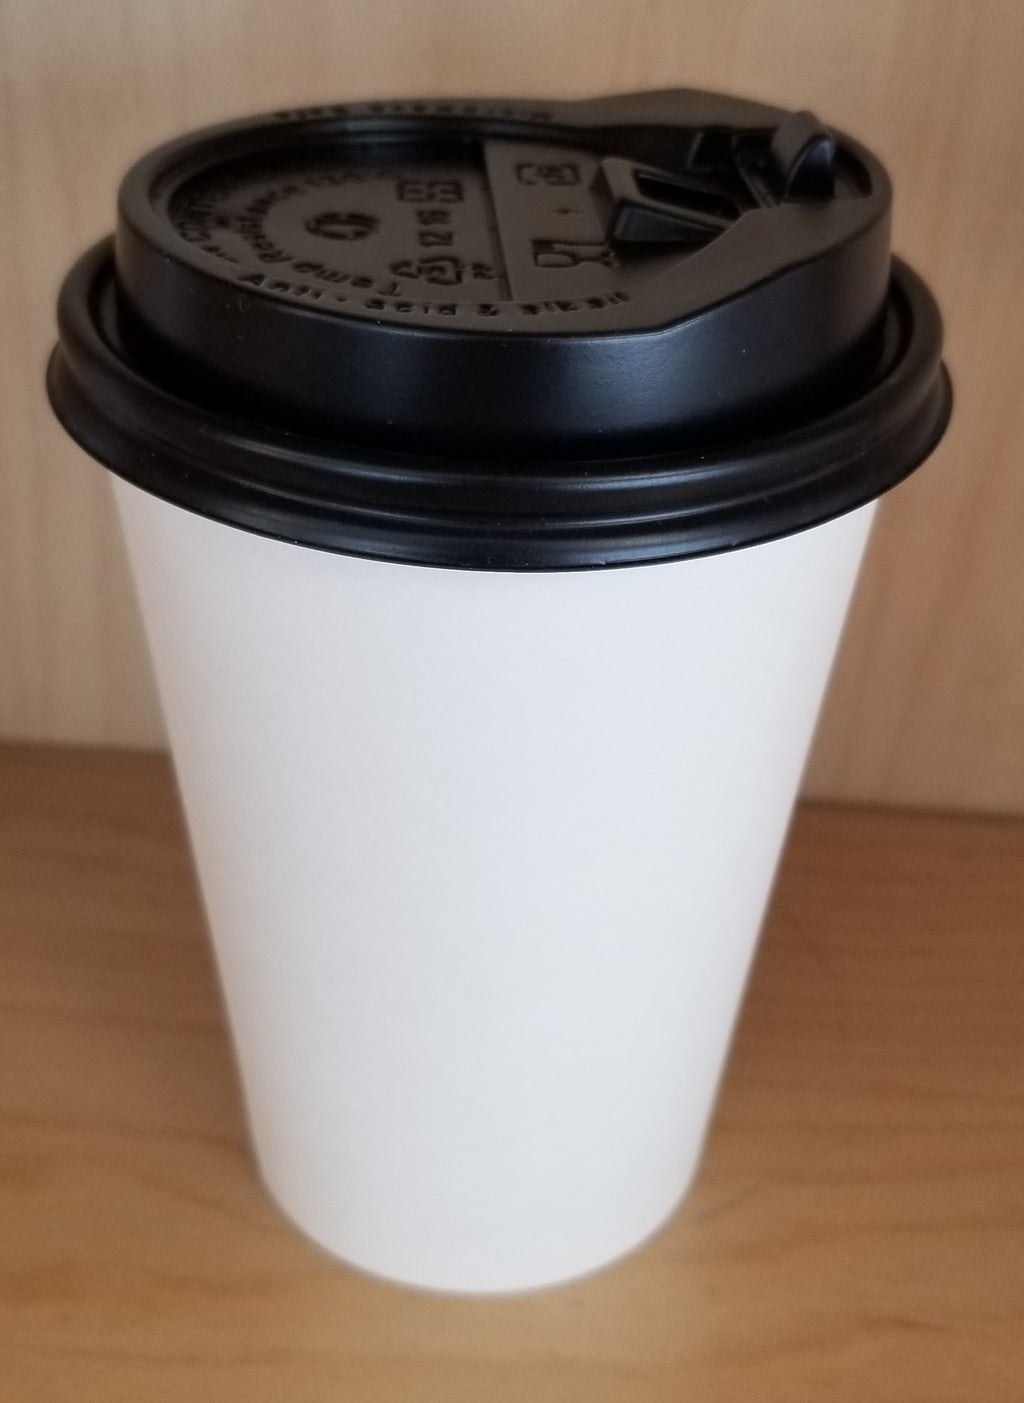 Hot Drink Paper Cups: 16 & 12 Ounces, and Covers